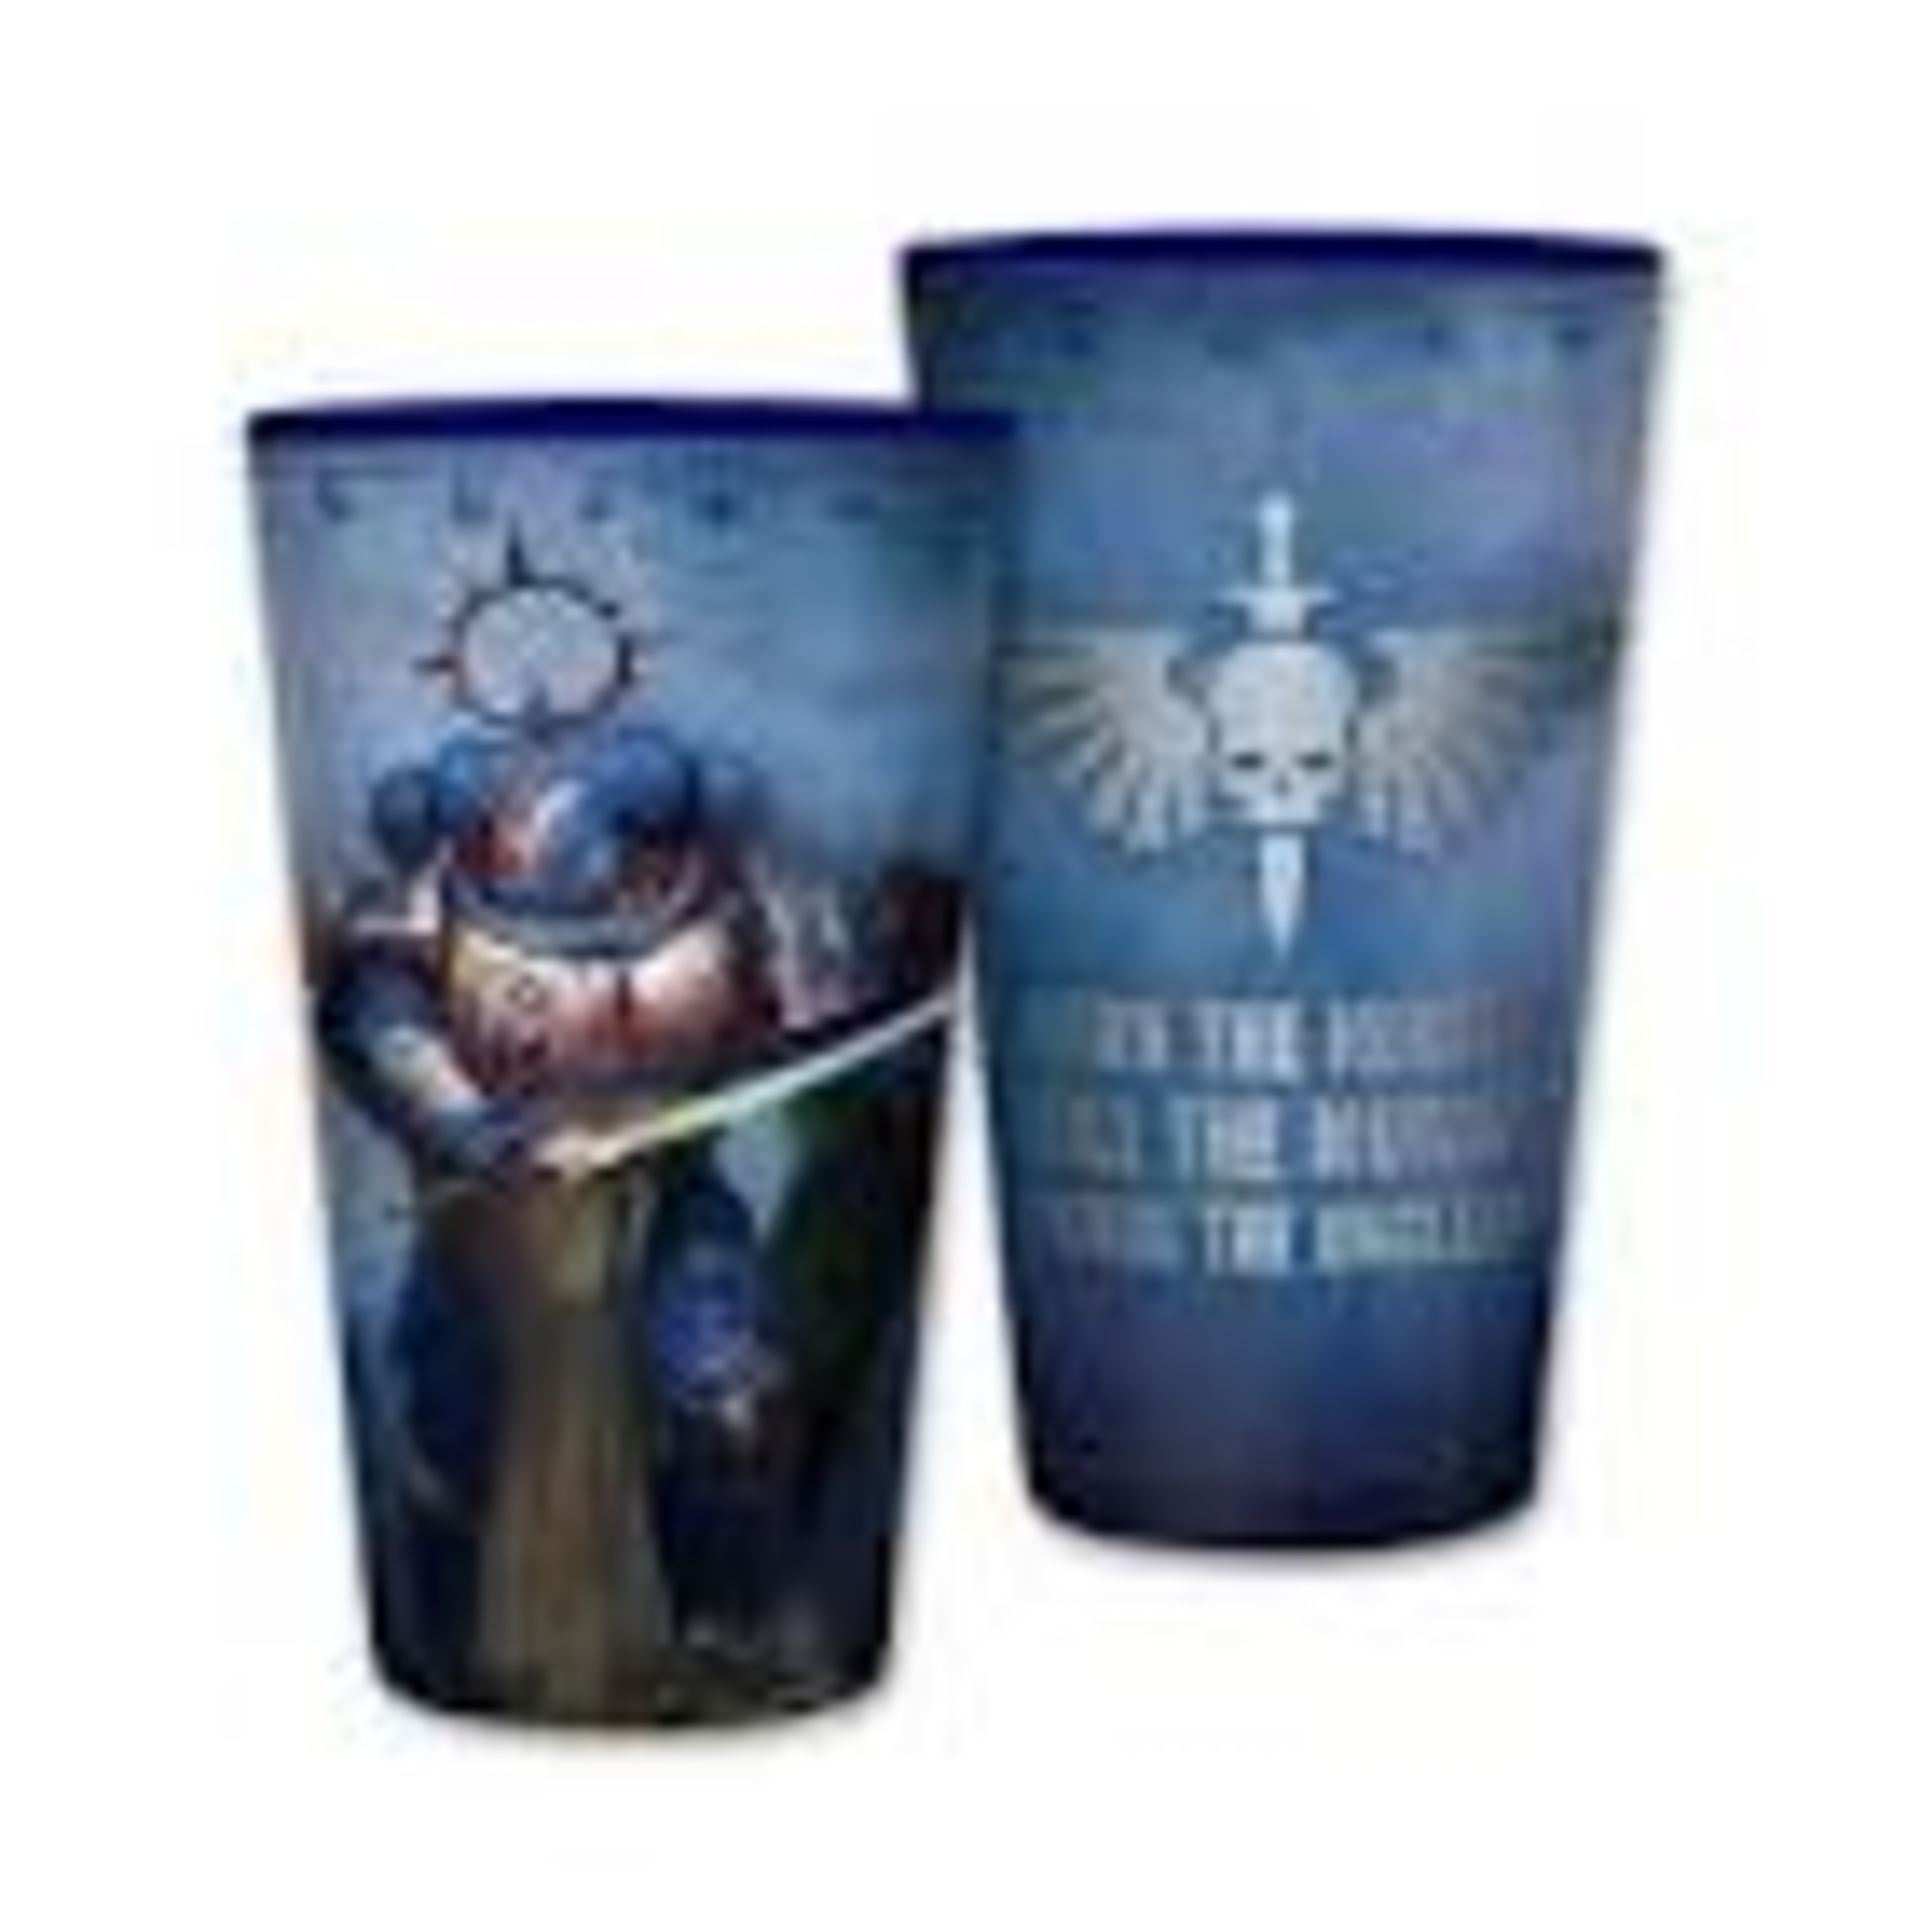 100 x Warhammer 40000 400ml Decorative Glass | Total RRP £1,300 - Image 4 of 4